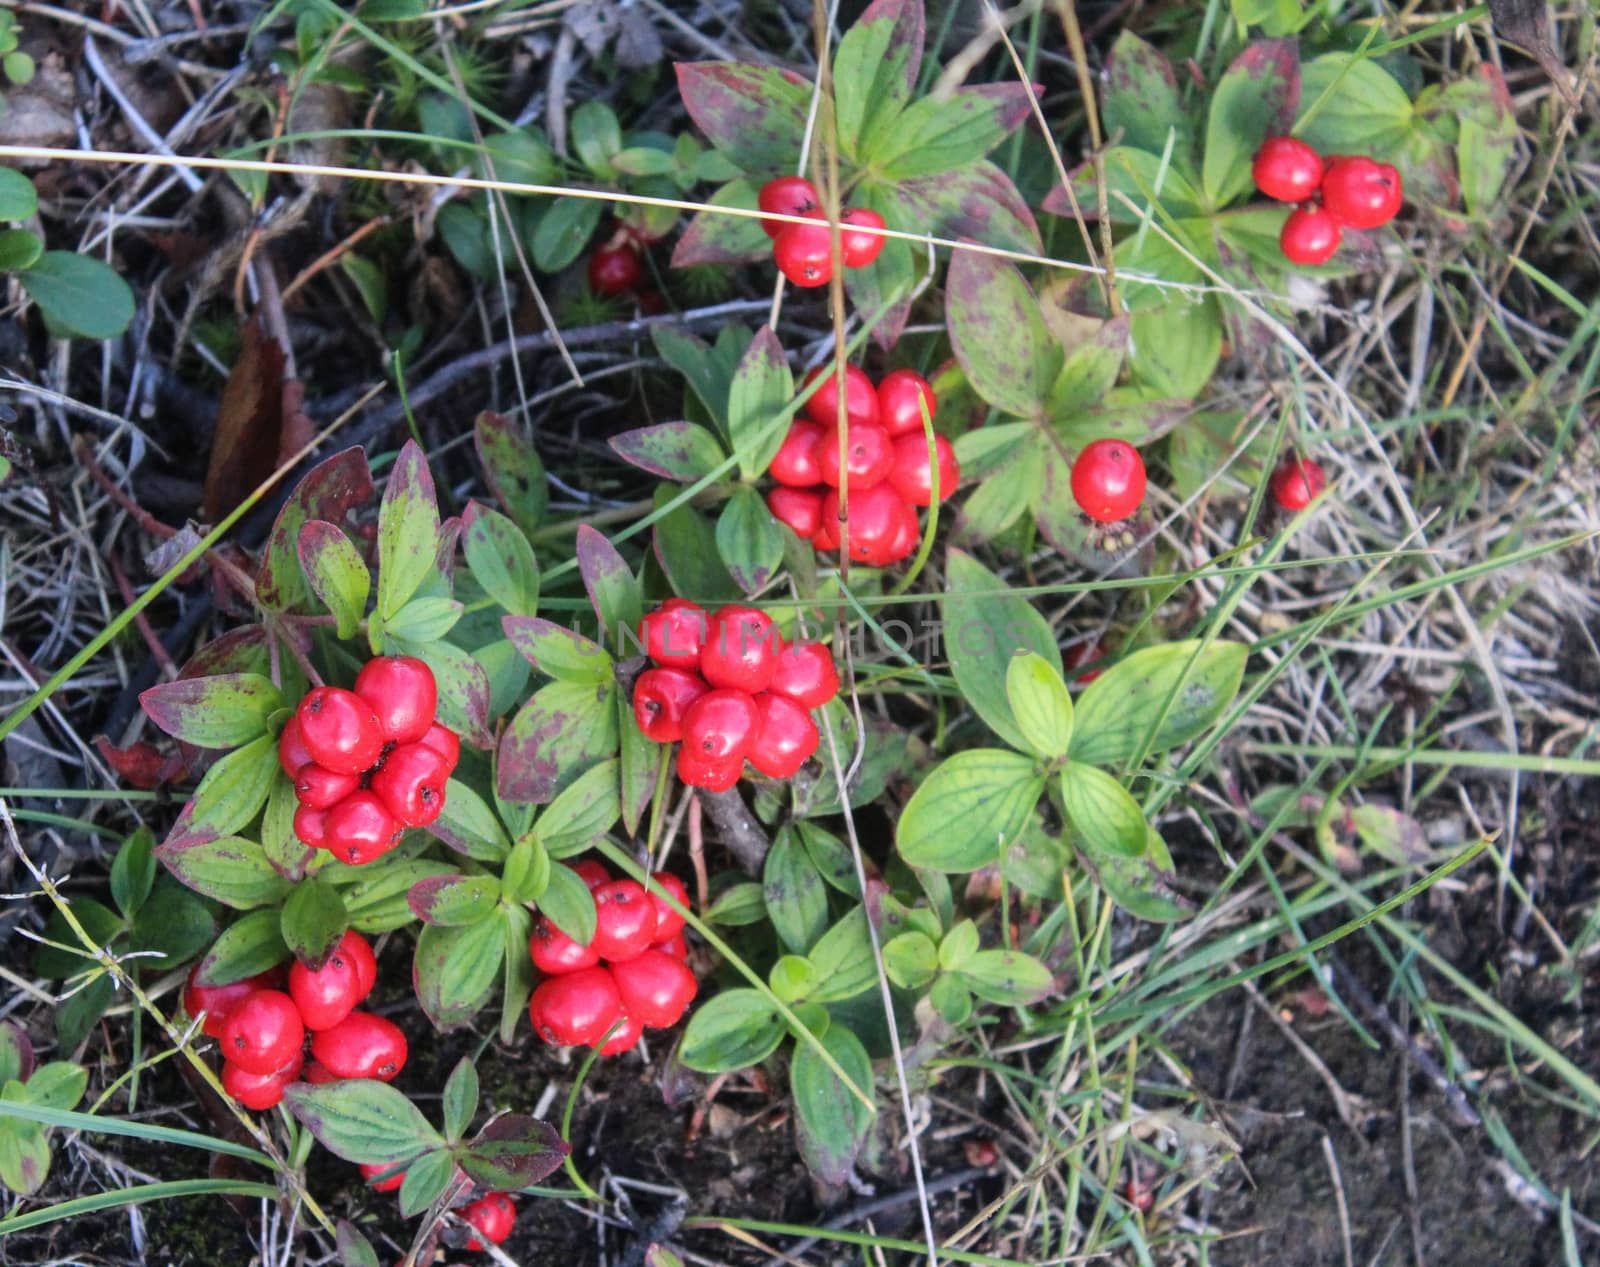 Vaccinium vitis-idaea also know as lingonberry, partridgeberry, mountain cranberry or cowberry by michaelmeijer